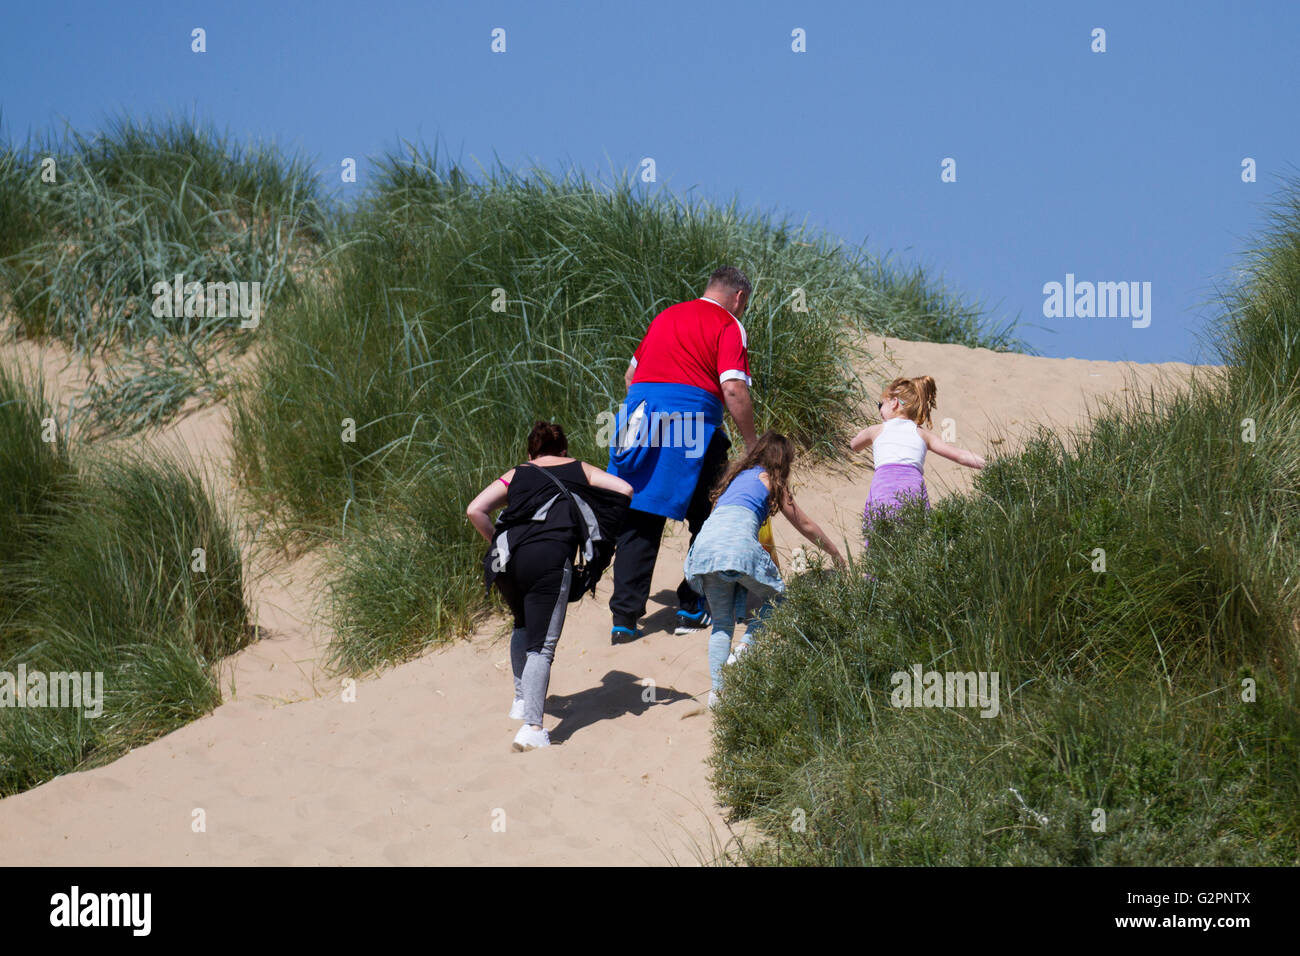 Sunny day at Ainsdale seaside sand dunes with Marram grass a landscape of the National Nature Coastal Reserve, Sefton coast, Southport, Merseyside, UK Stock Photo